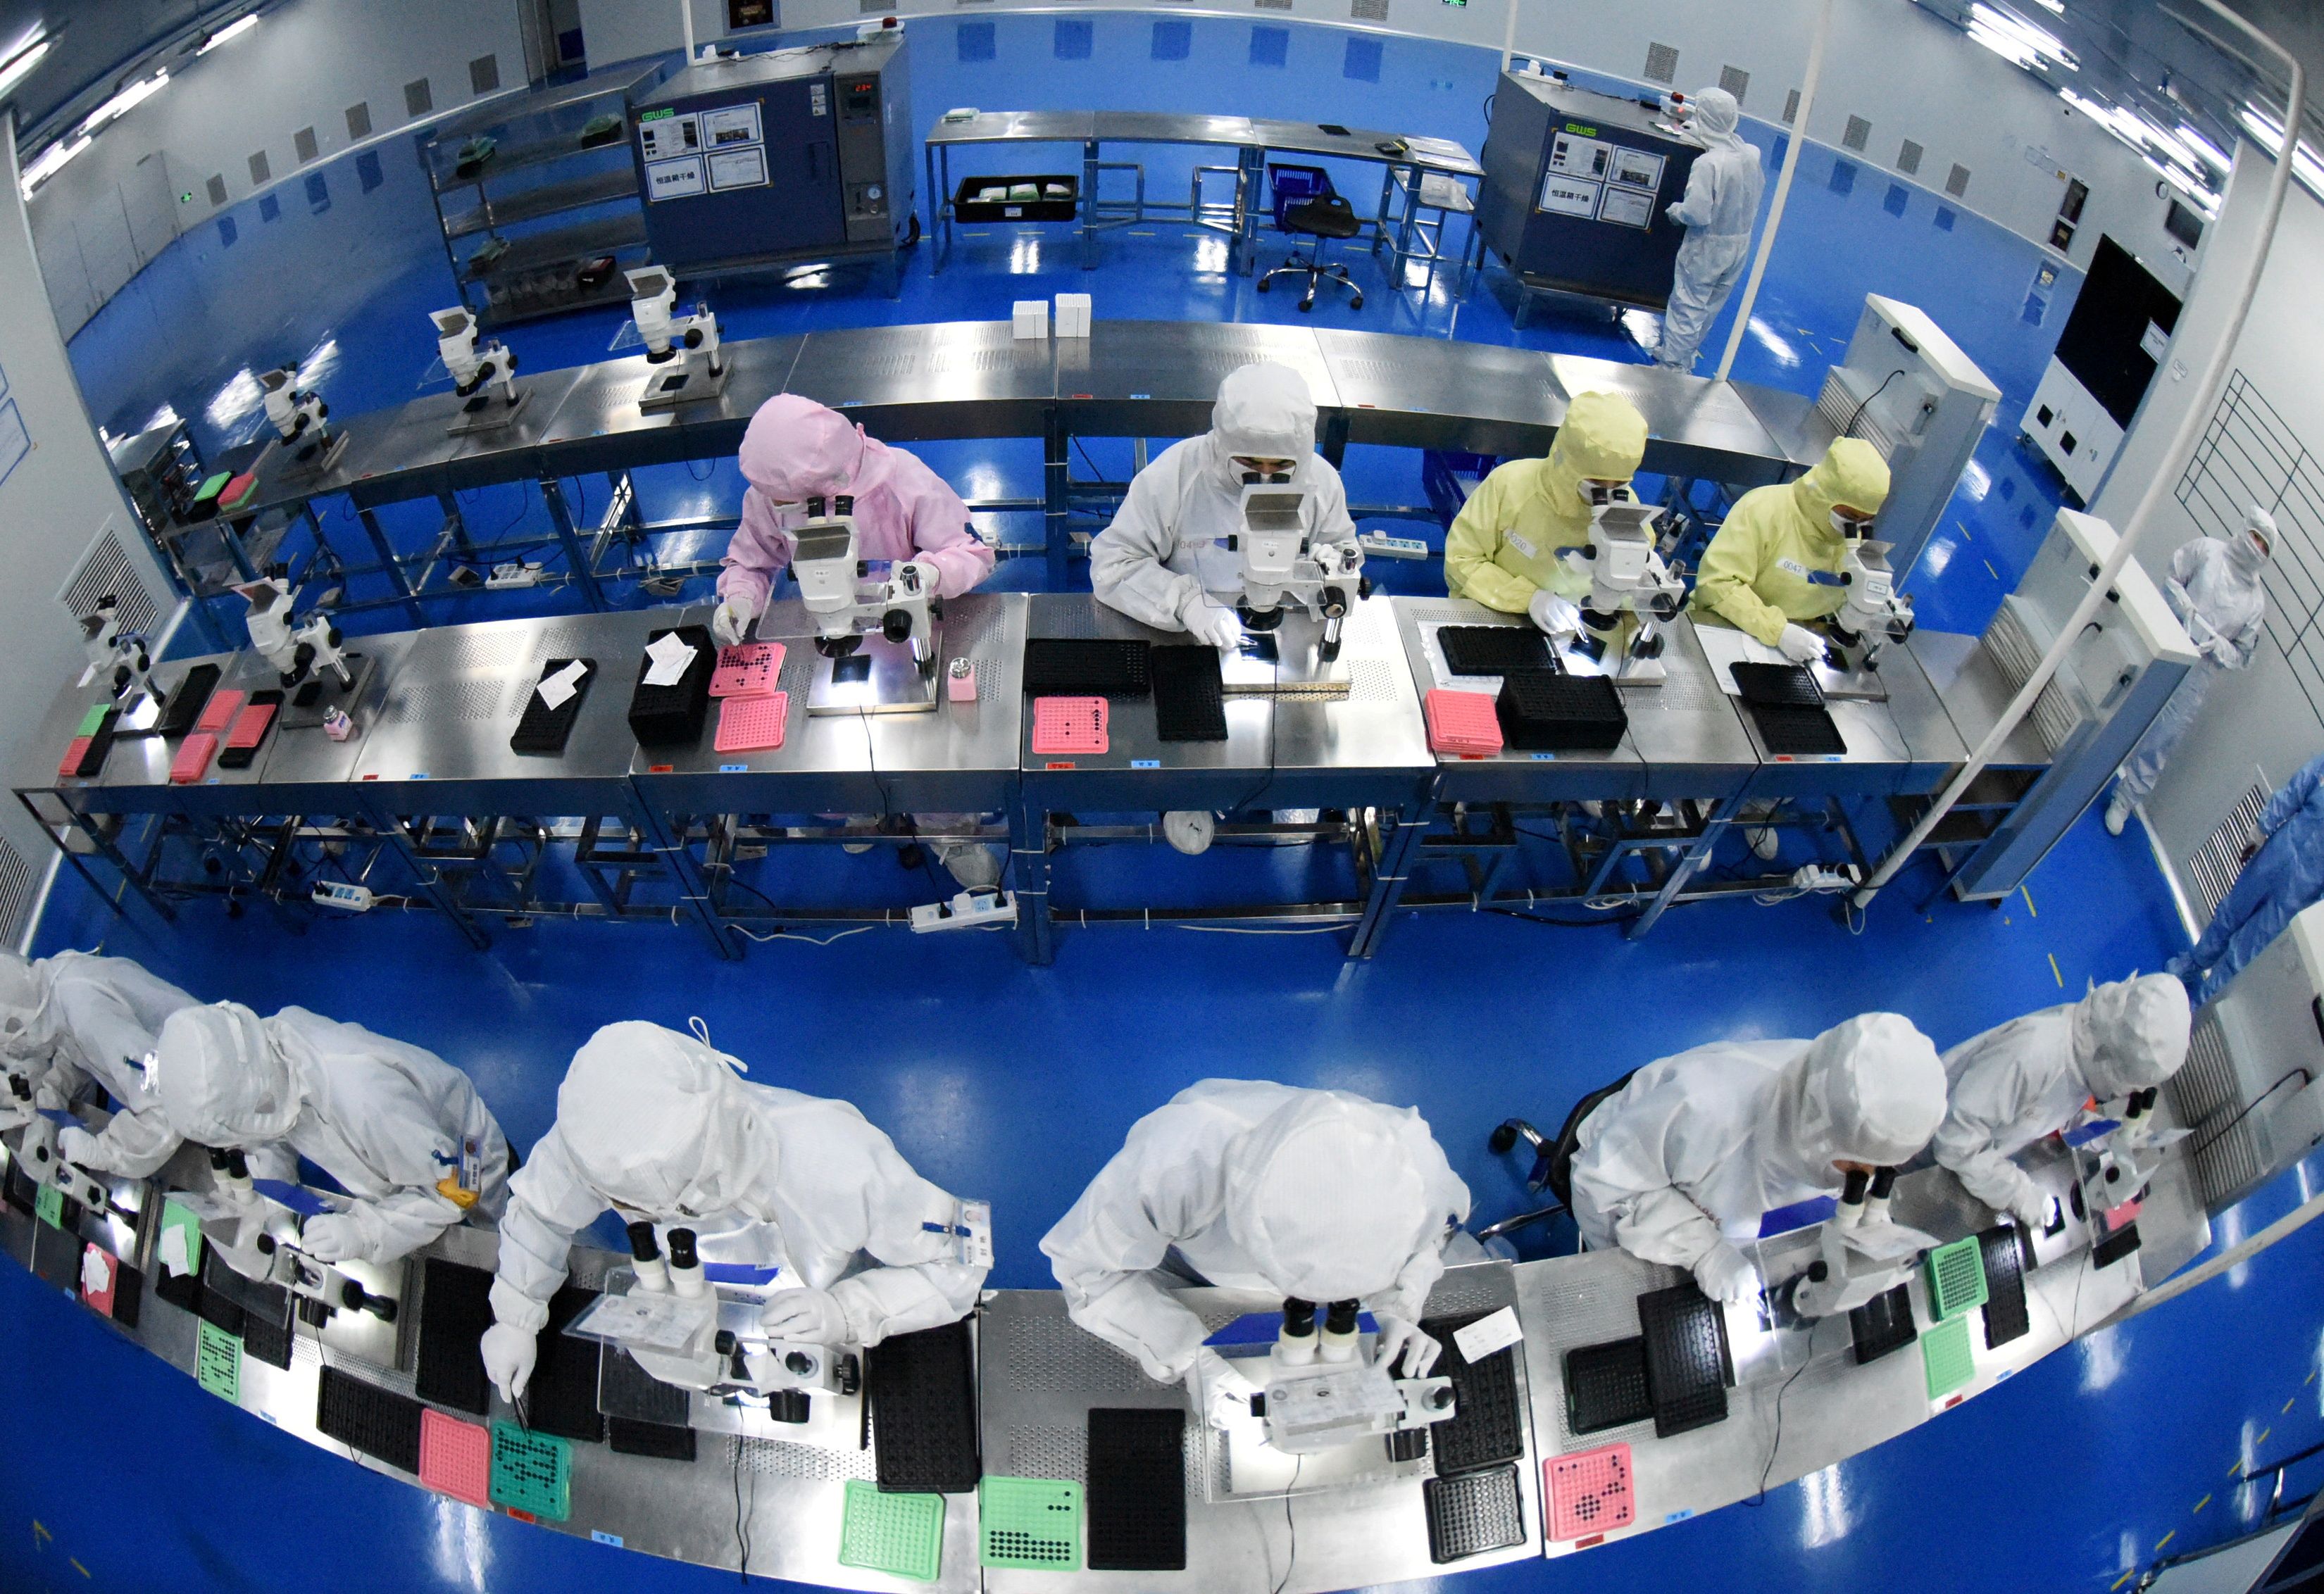 Employees work on a production line manufacturing camera lenses for cellphones at a factory in Lianyungang, Jiangsu province, China April 30, 2019. Picture taken with a fisheye lens. China Daily via REUTERS